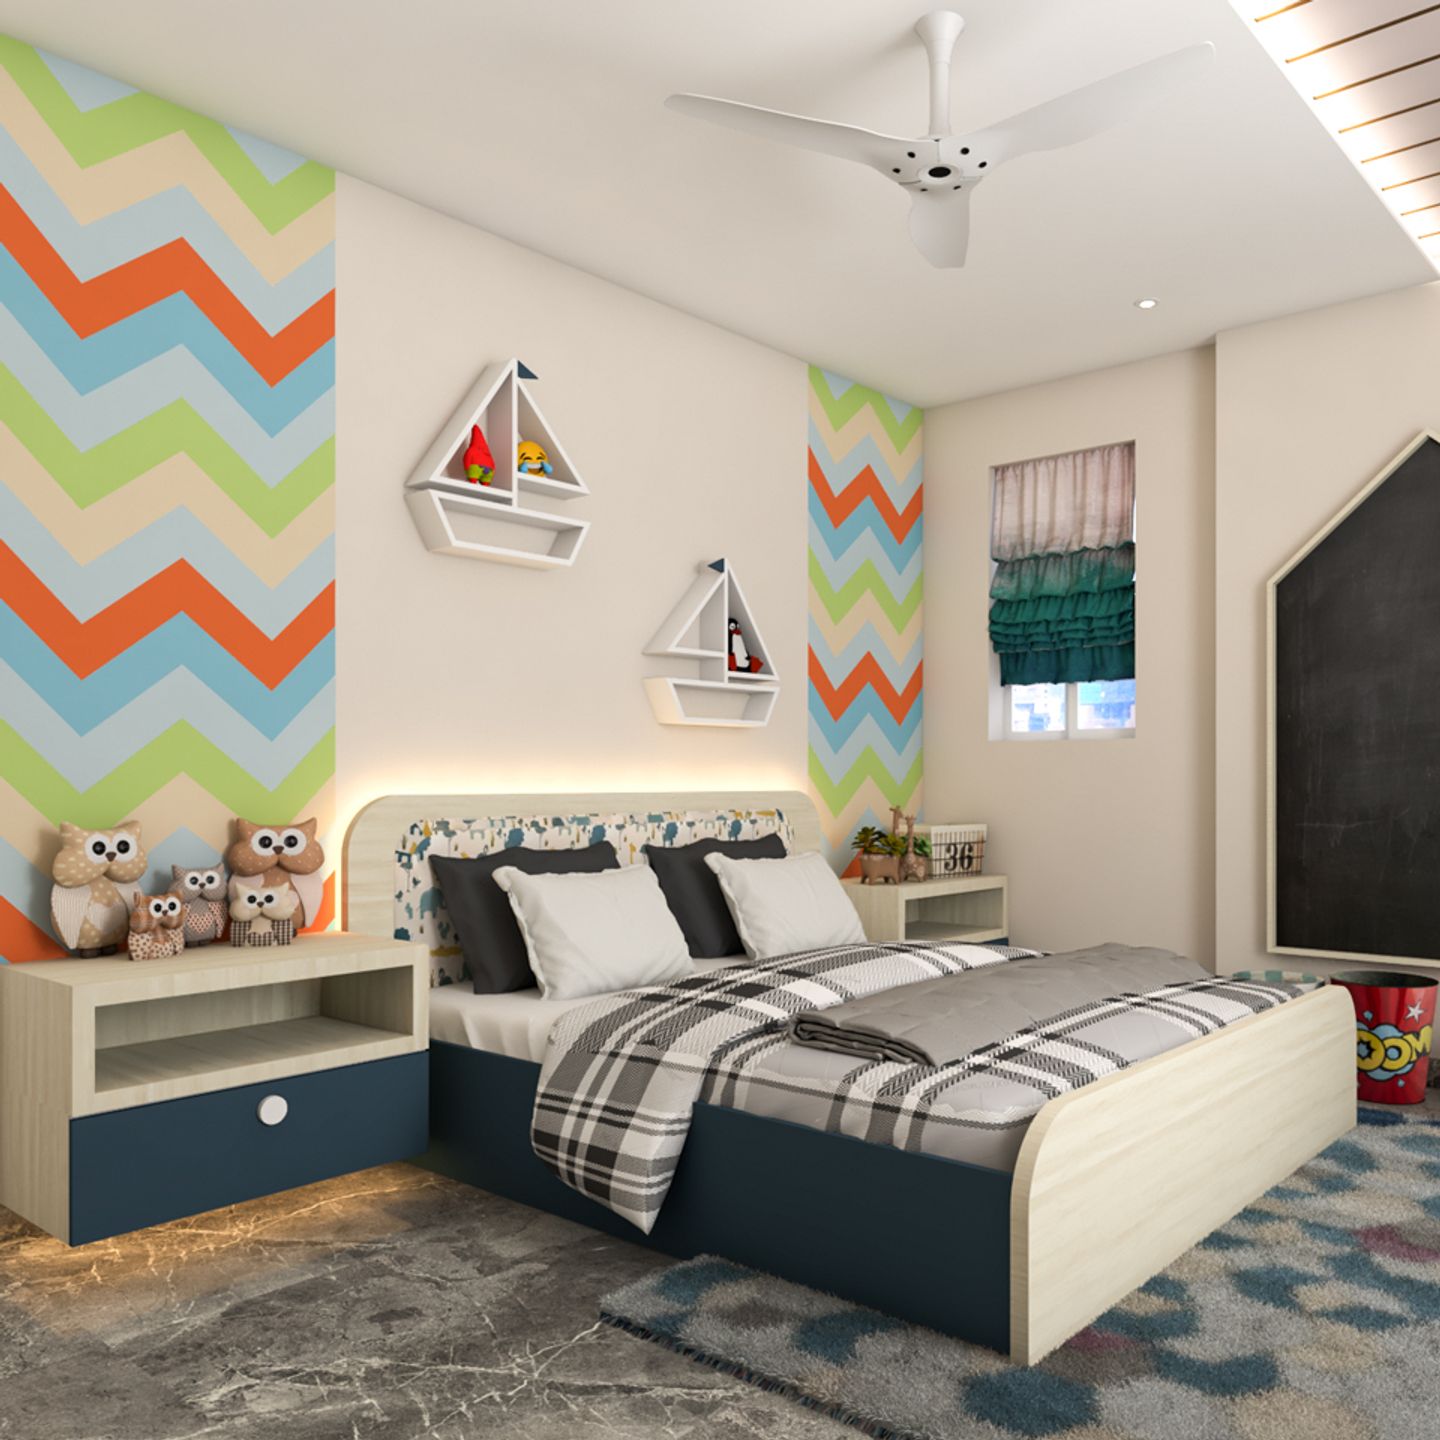 Multifunctional-Modern Kids Bedroom Design With Colourful Interiors - Livspace